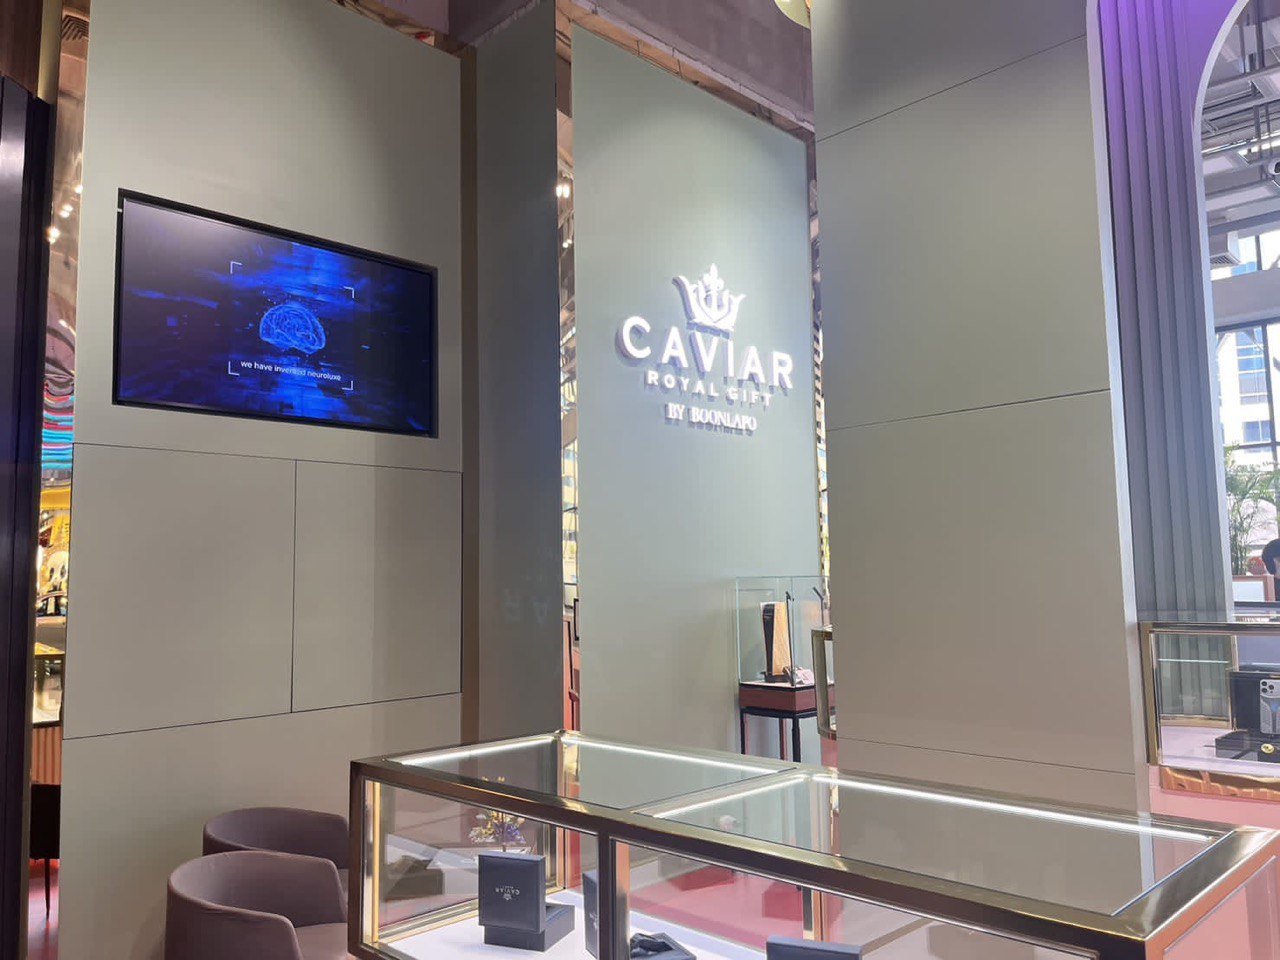 The grandest Caviar boutique has officially opened in Thailand